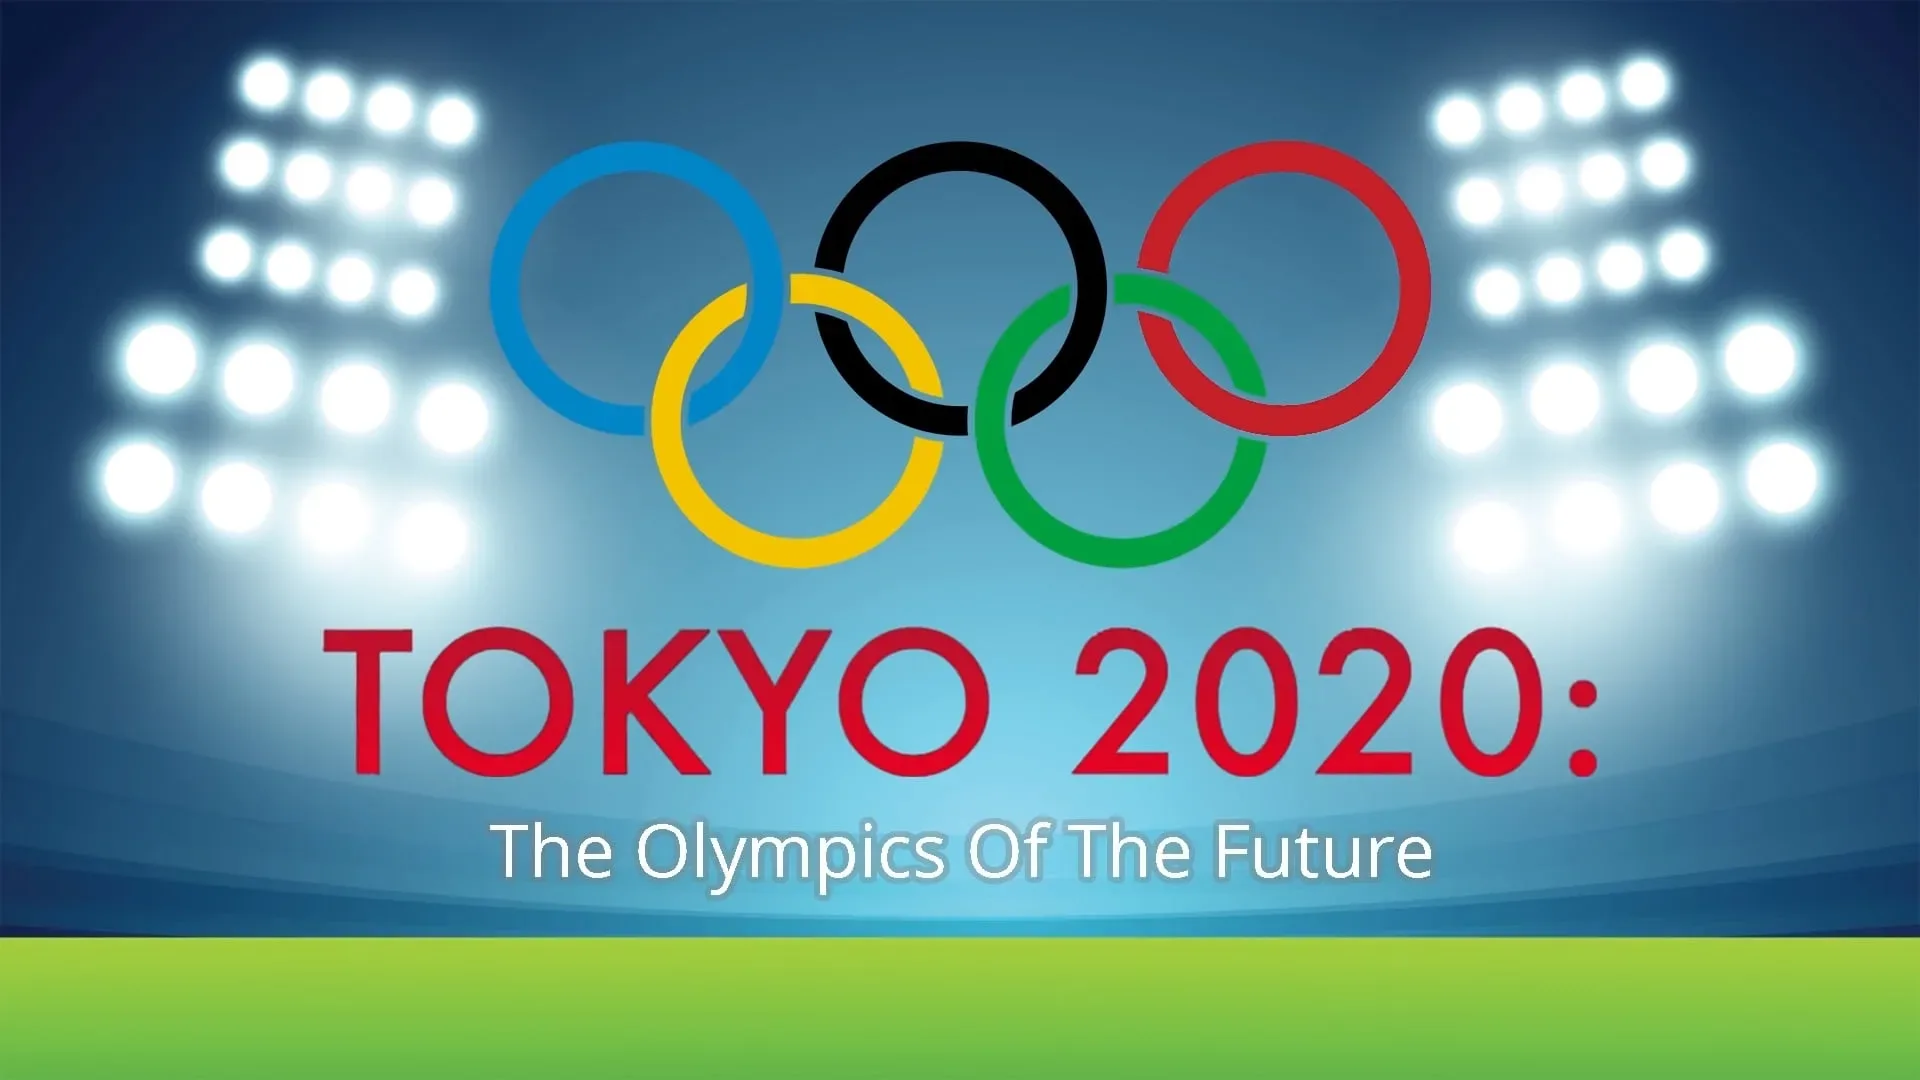 From Tokyo Summer Games To High-Tech Olympics 2020 Tokyo